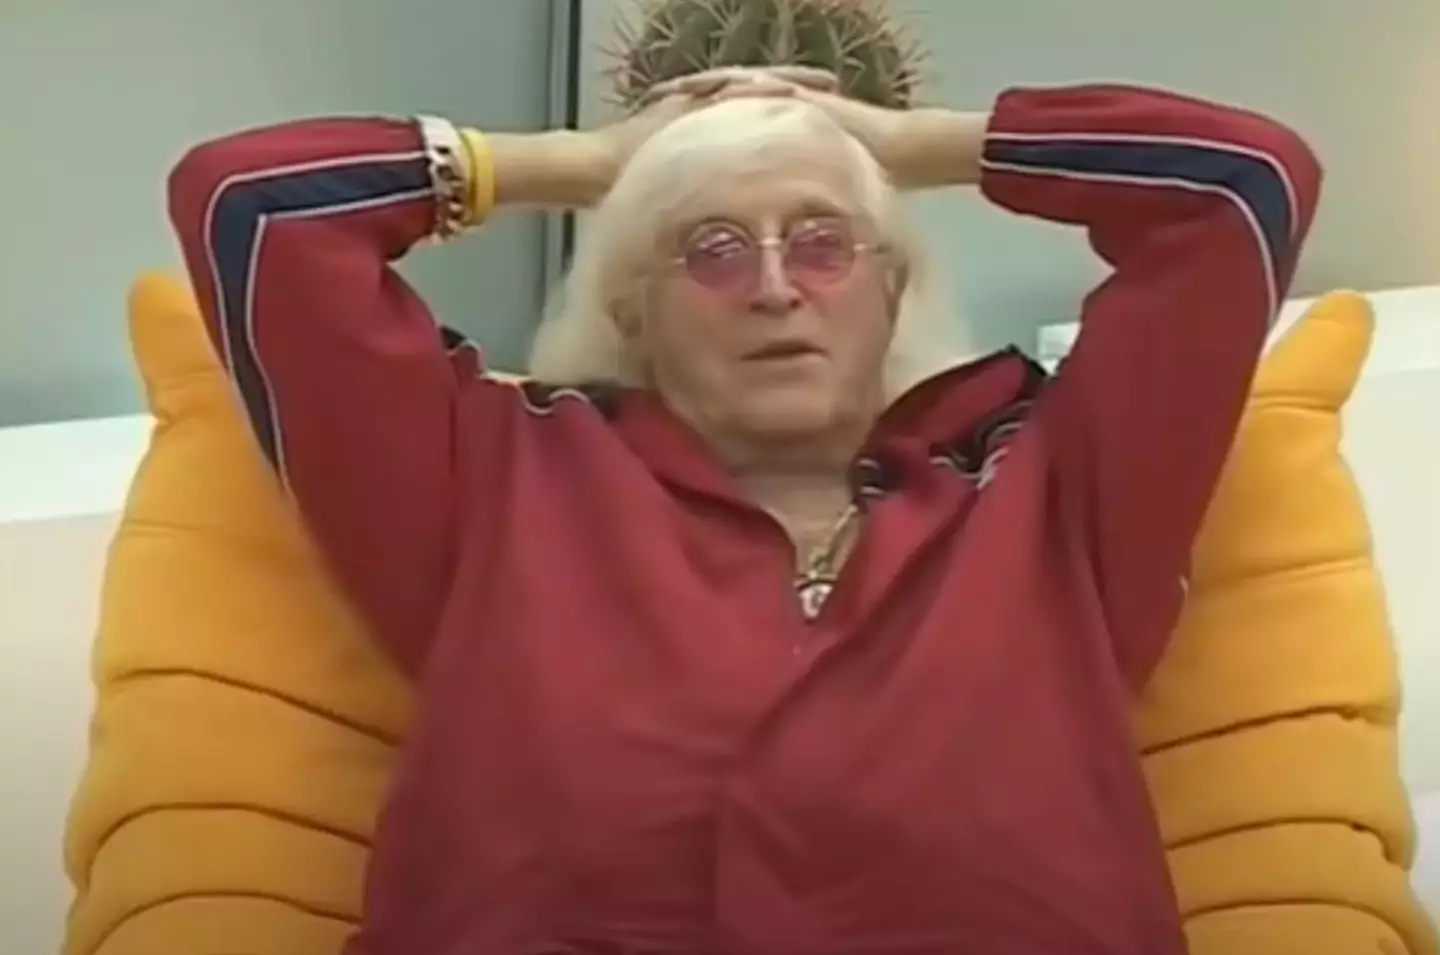 Jimmy Saville appeared on the show in 2006.